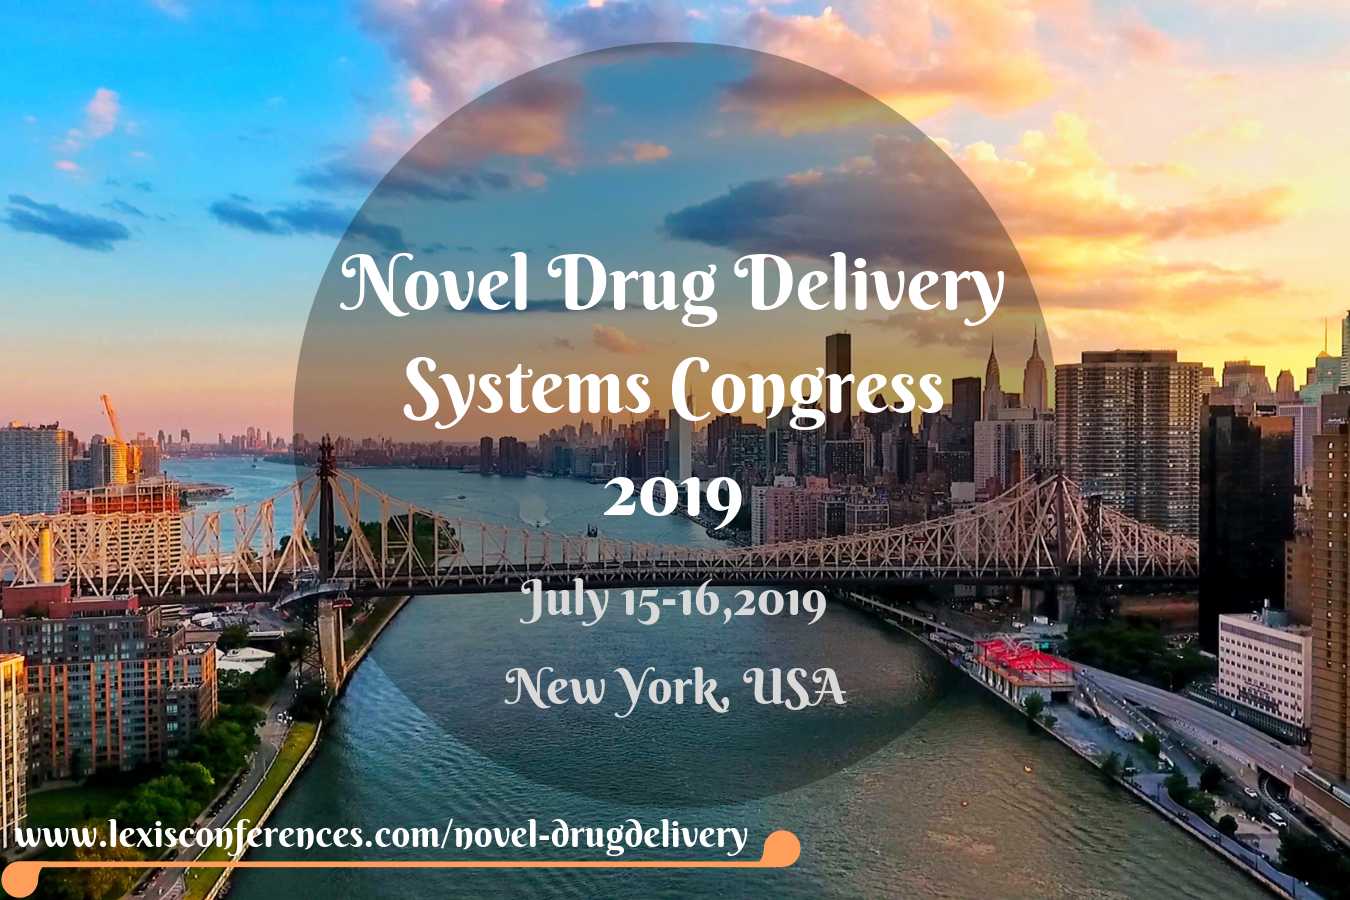 Novel Drug Delivery Systems Congress 2019, New York, United States